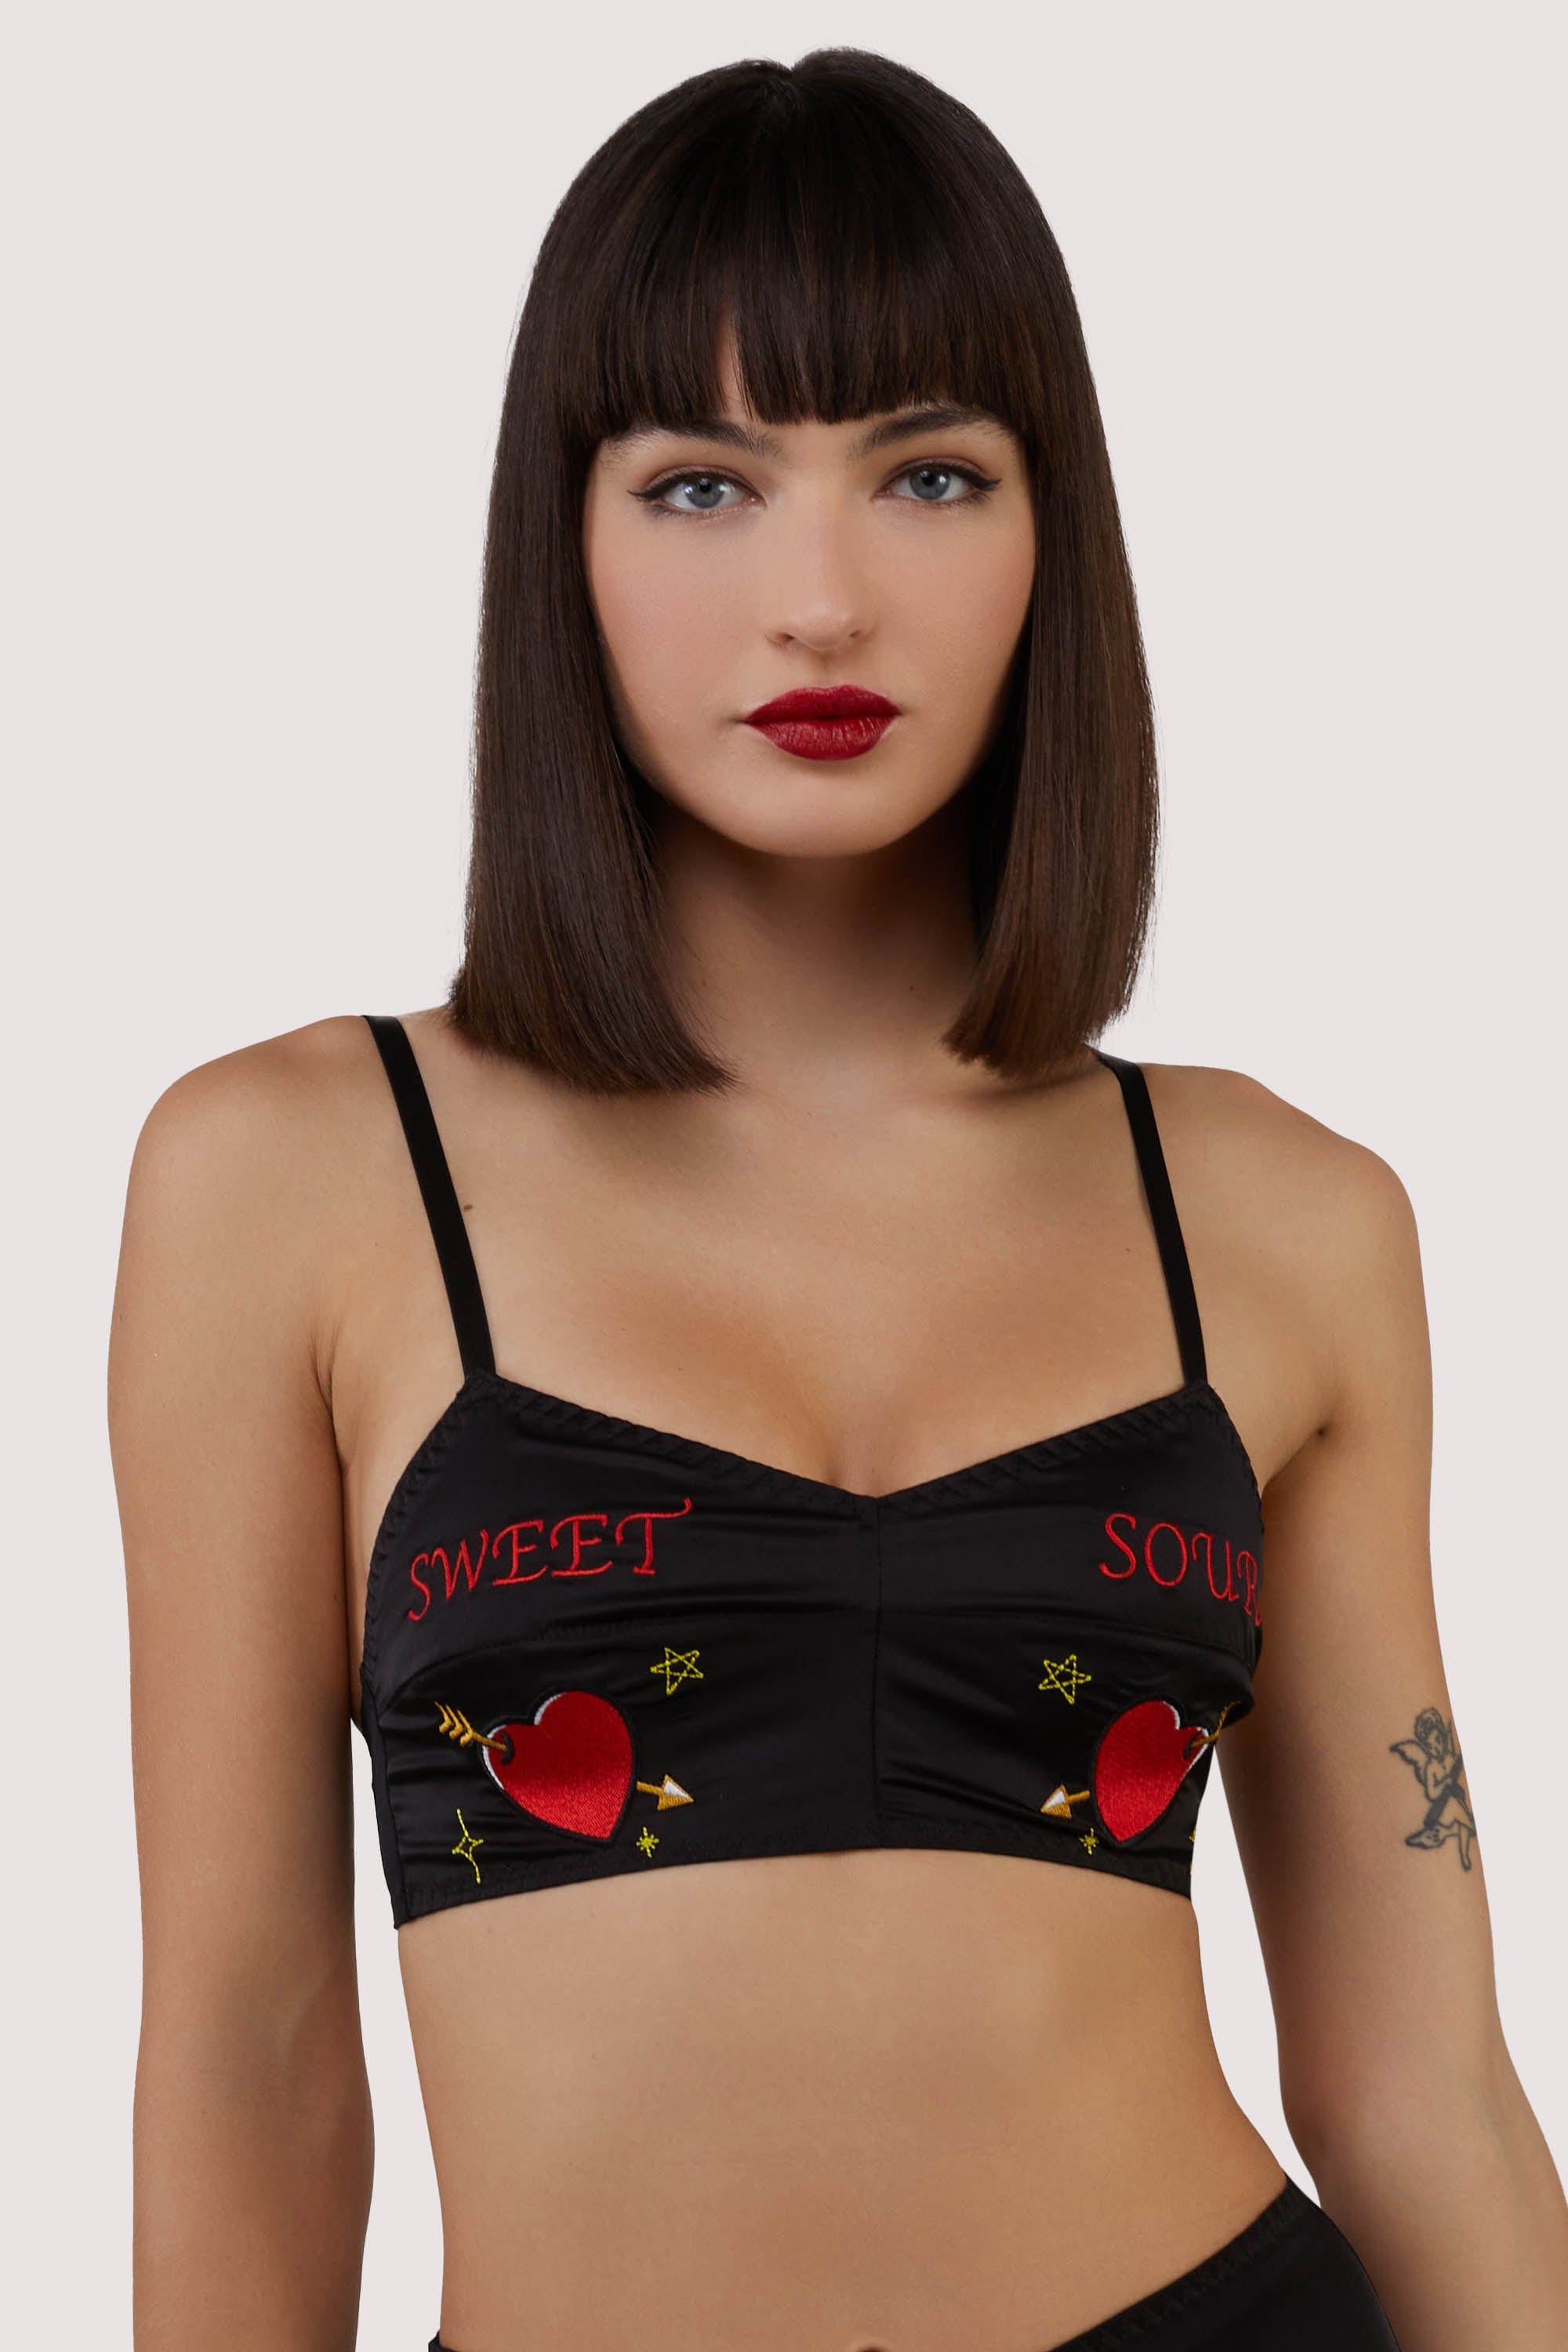 model wears black satin bralette with retro embroidery